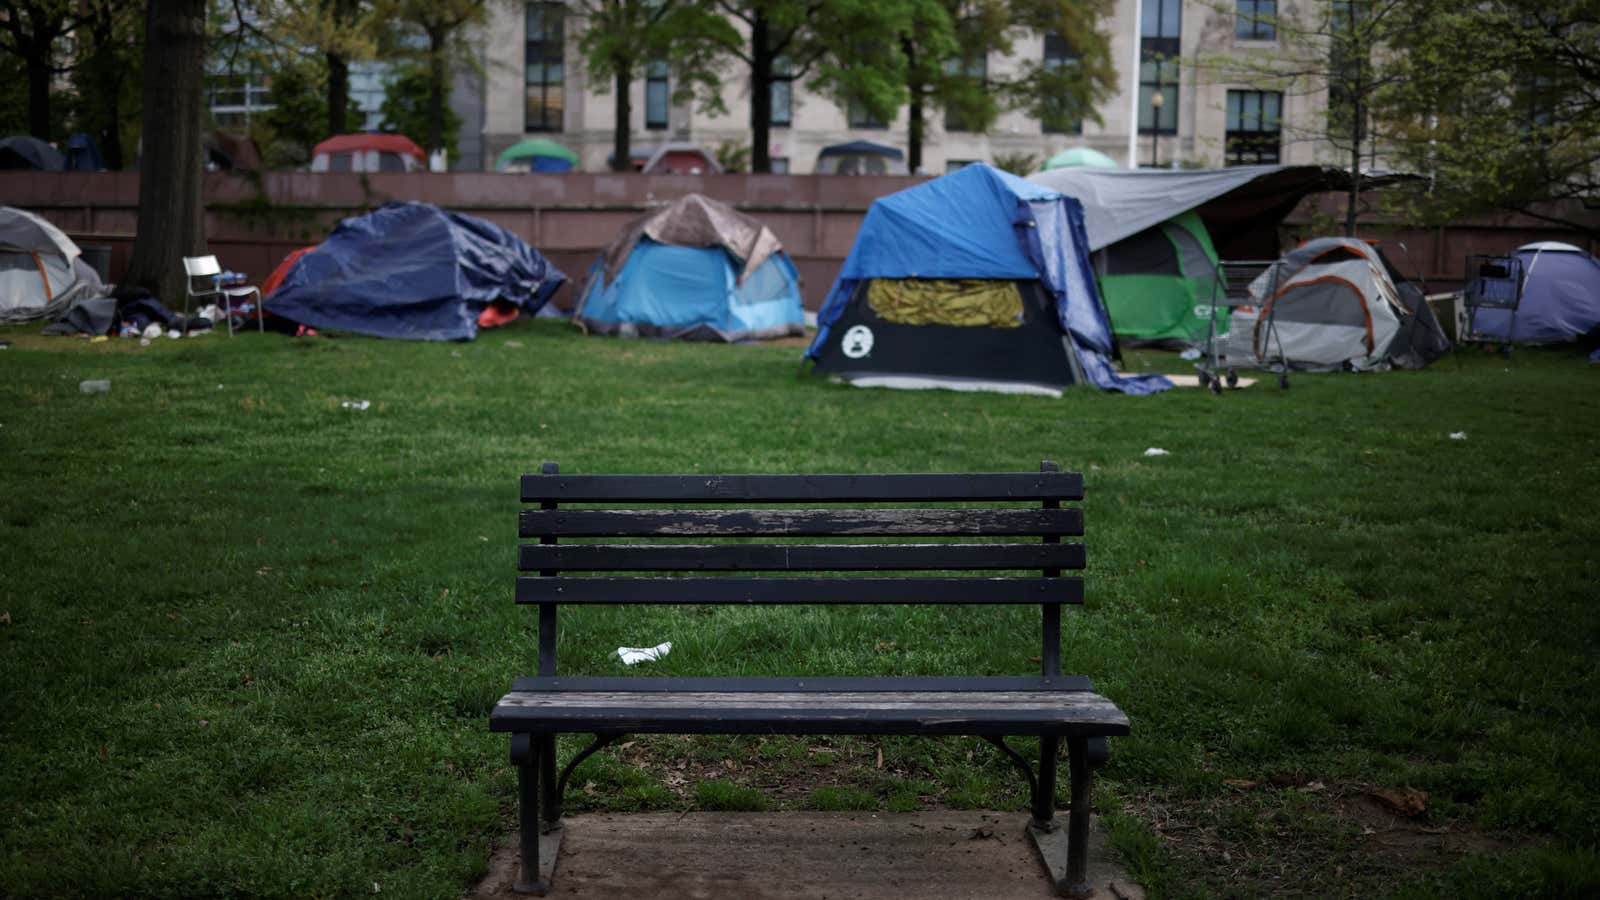 Tent encampments  of people experiencing homelessness are common throughout US cities…but they don’t have to be.